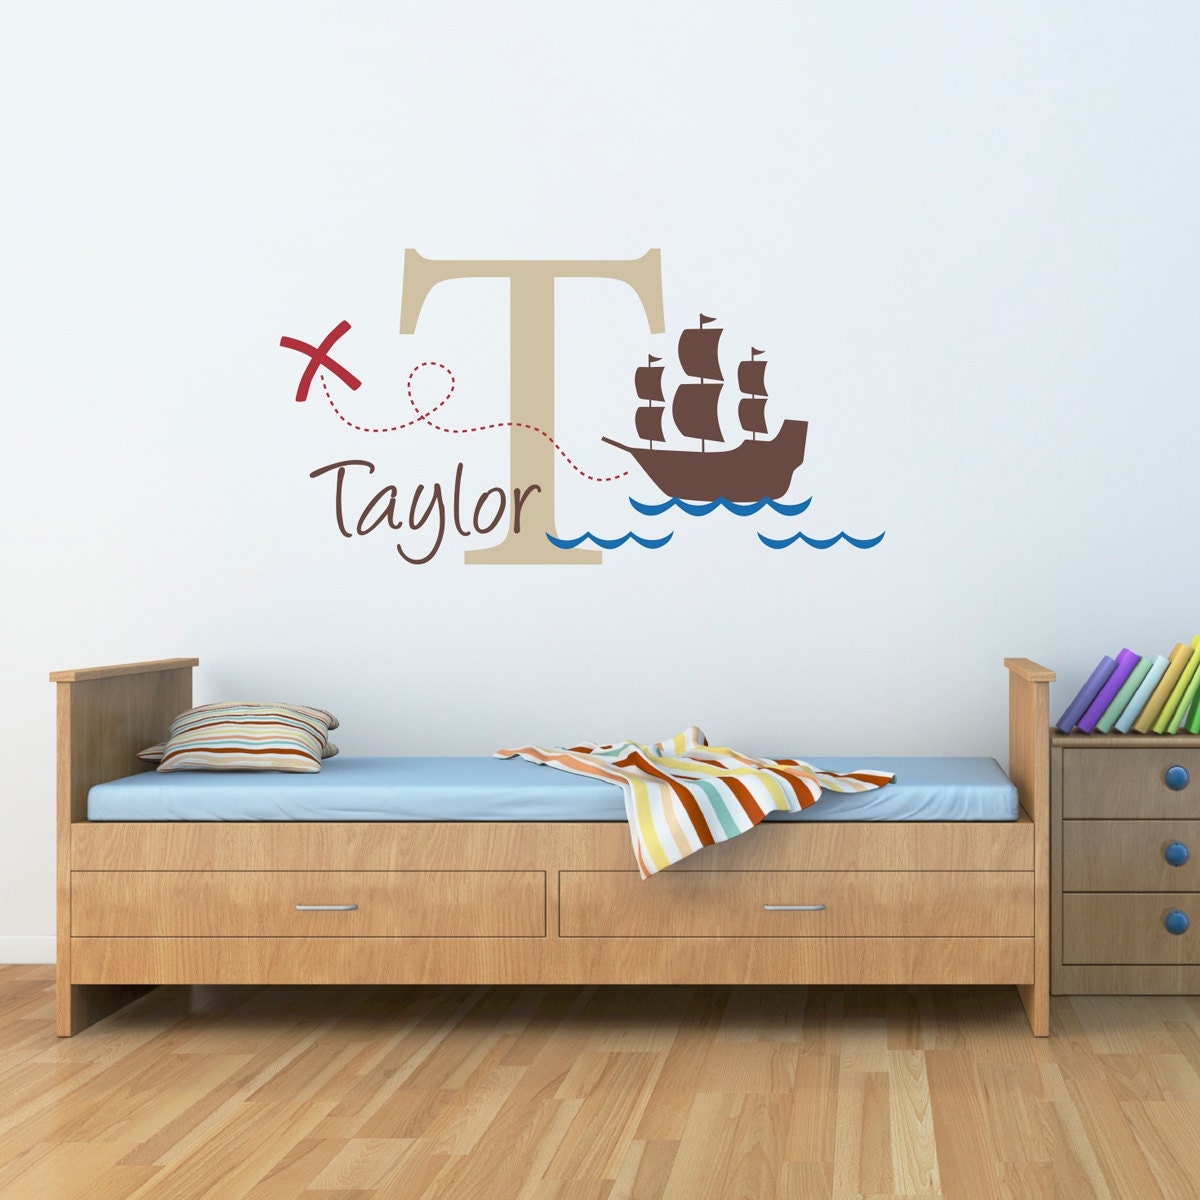 Pirate Ship Wall Decal with Initial & Name - Personalized Name Wall Decal - X marks the spot - Large